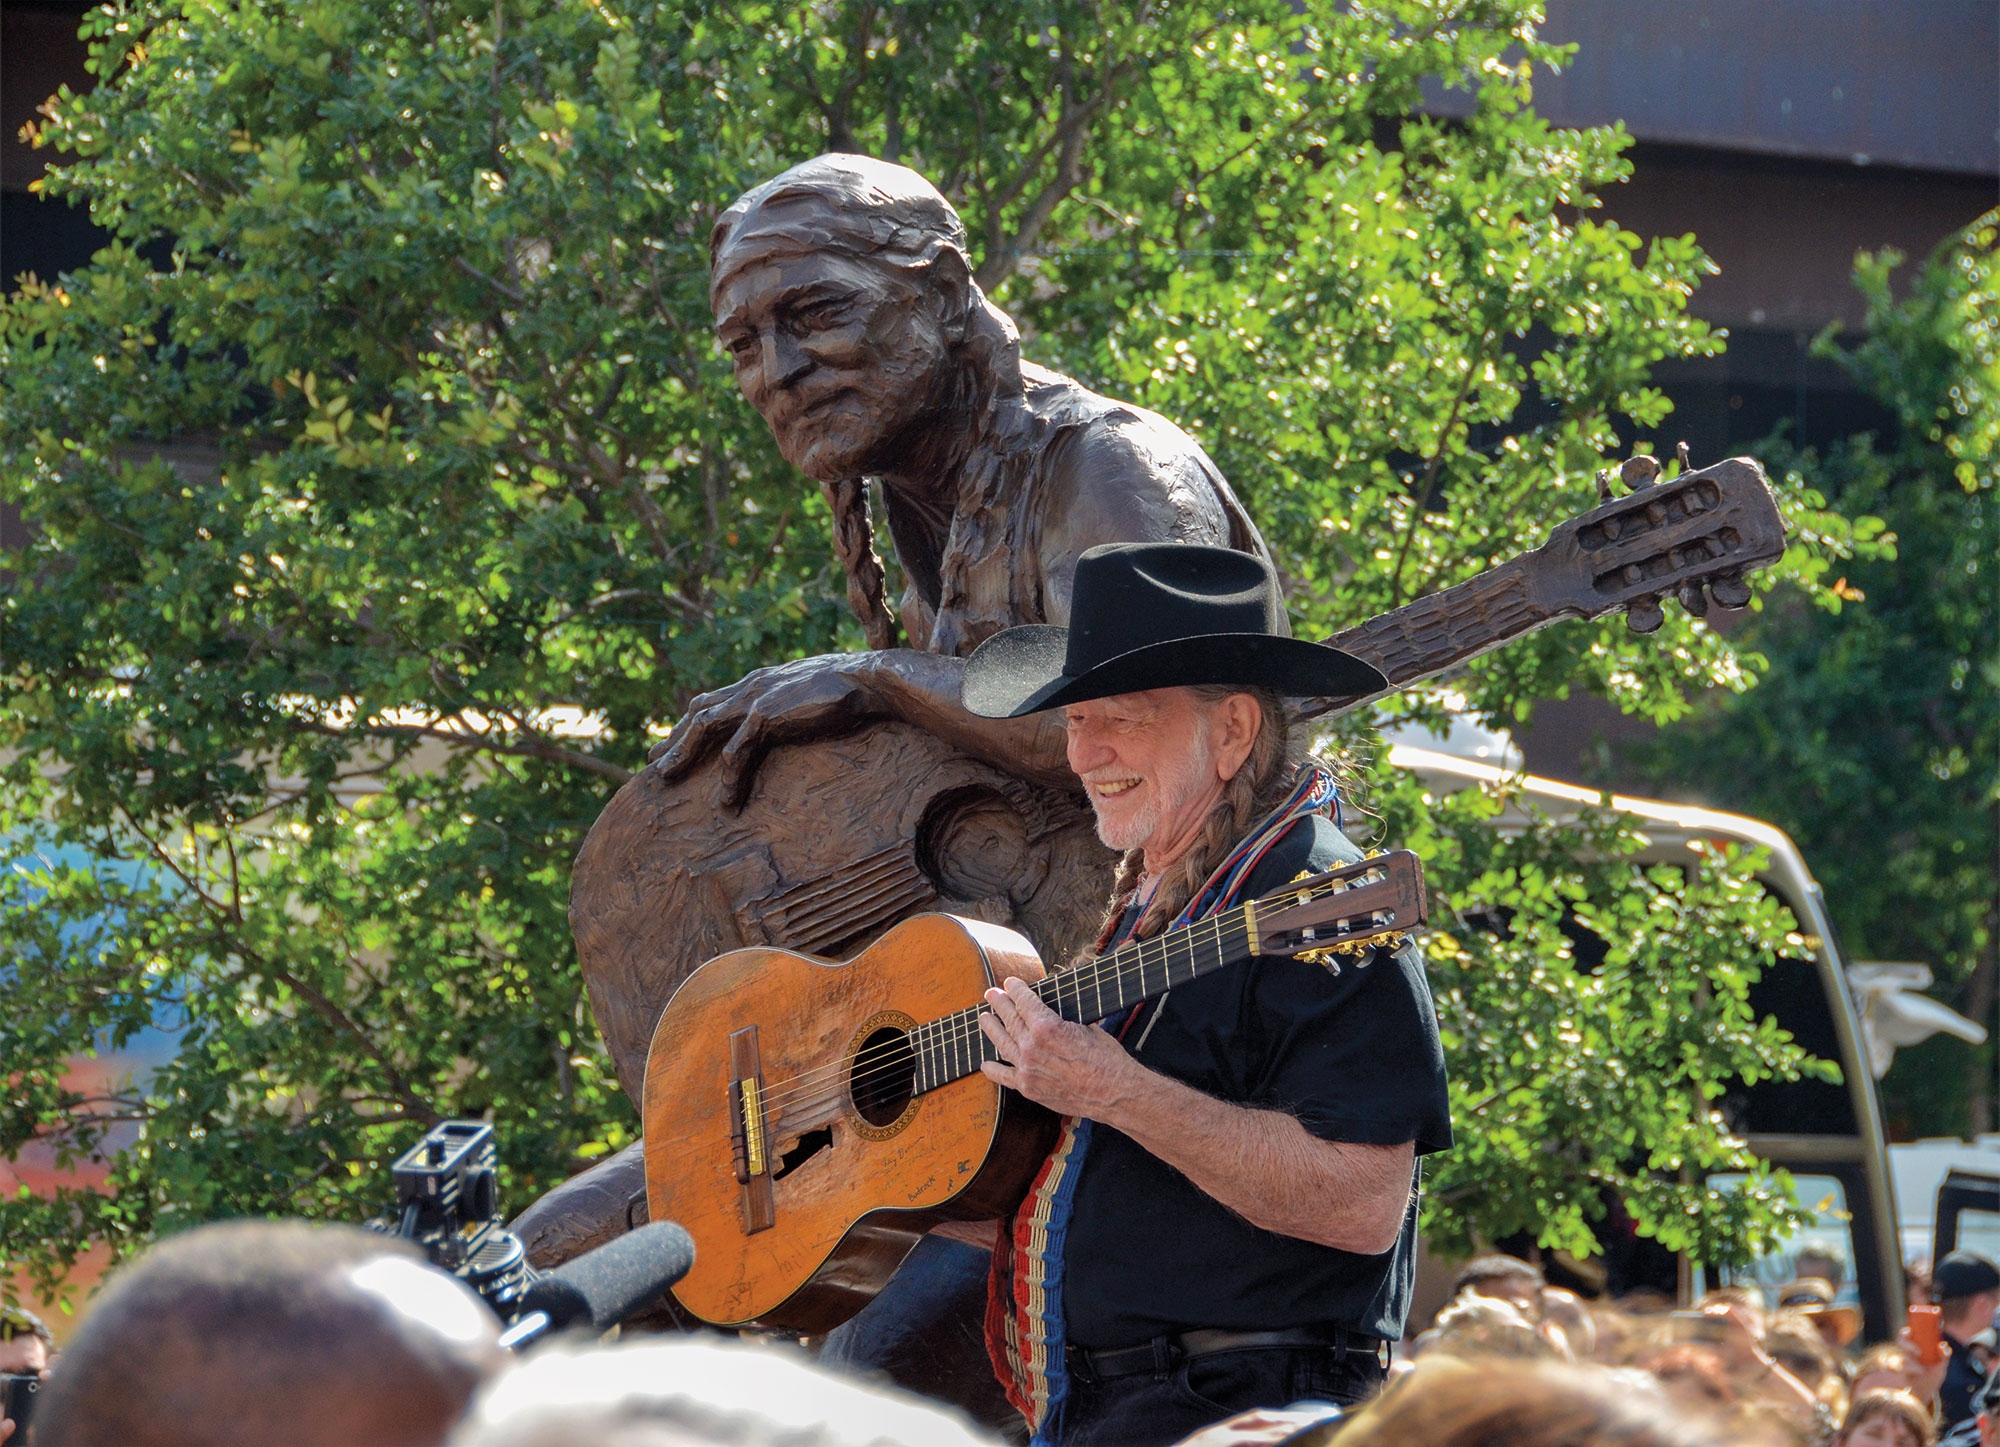 Willie in front of his statue at Austin City Limits. Photo: Turk Pipkin